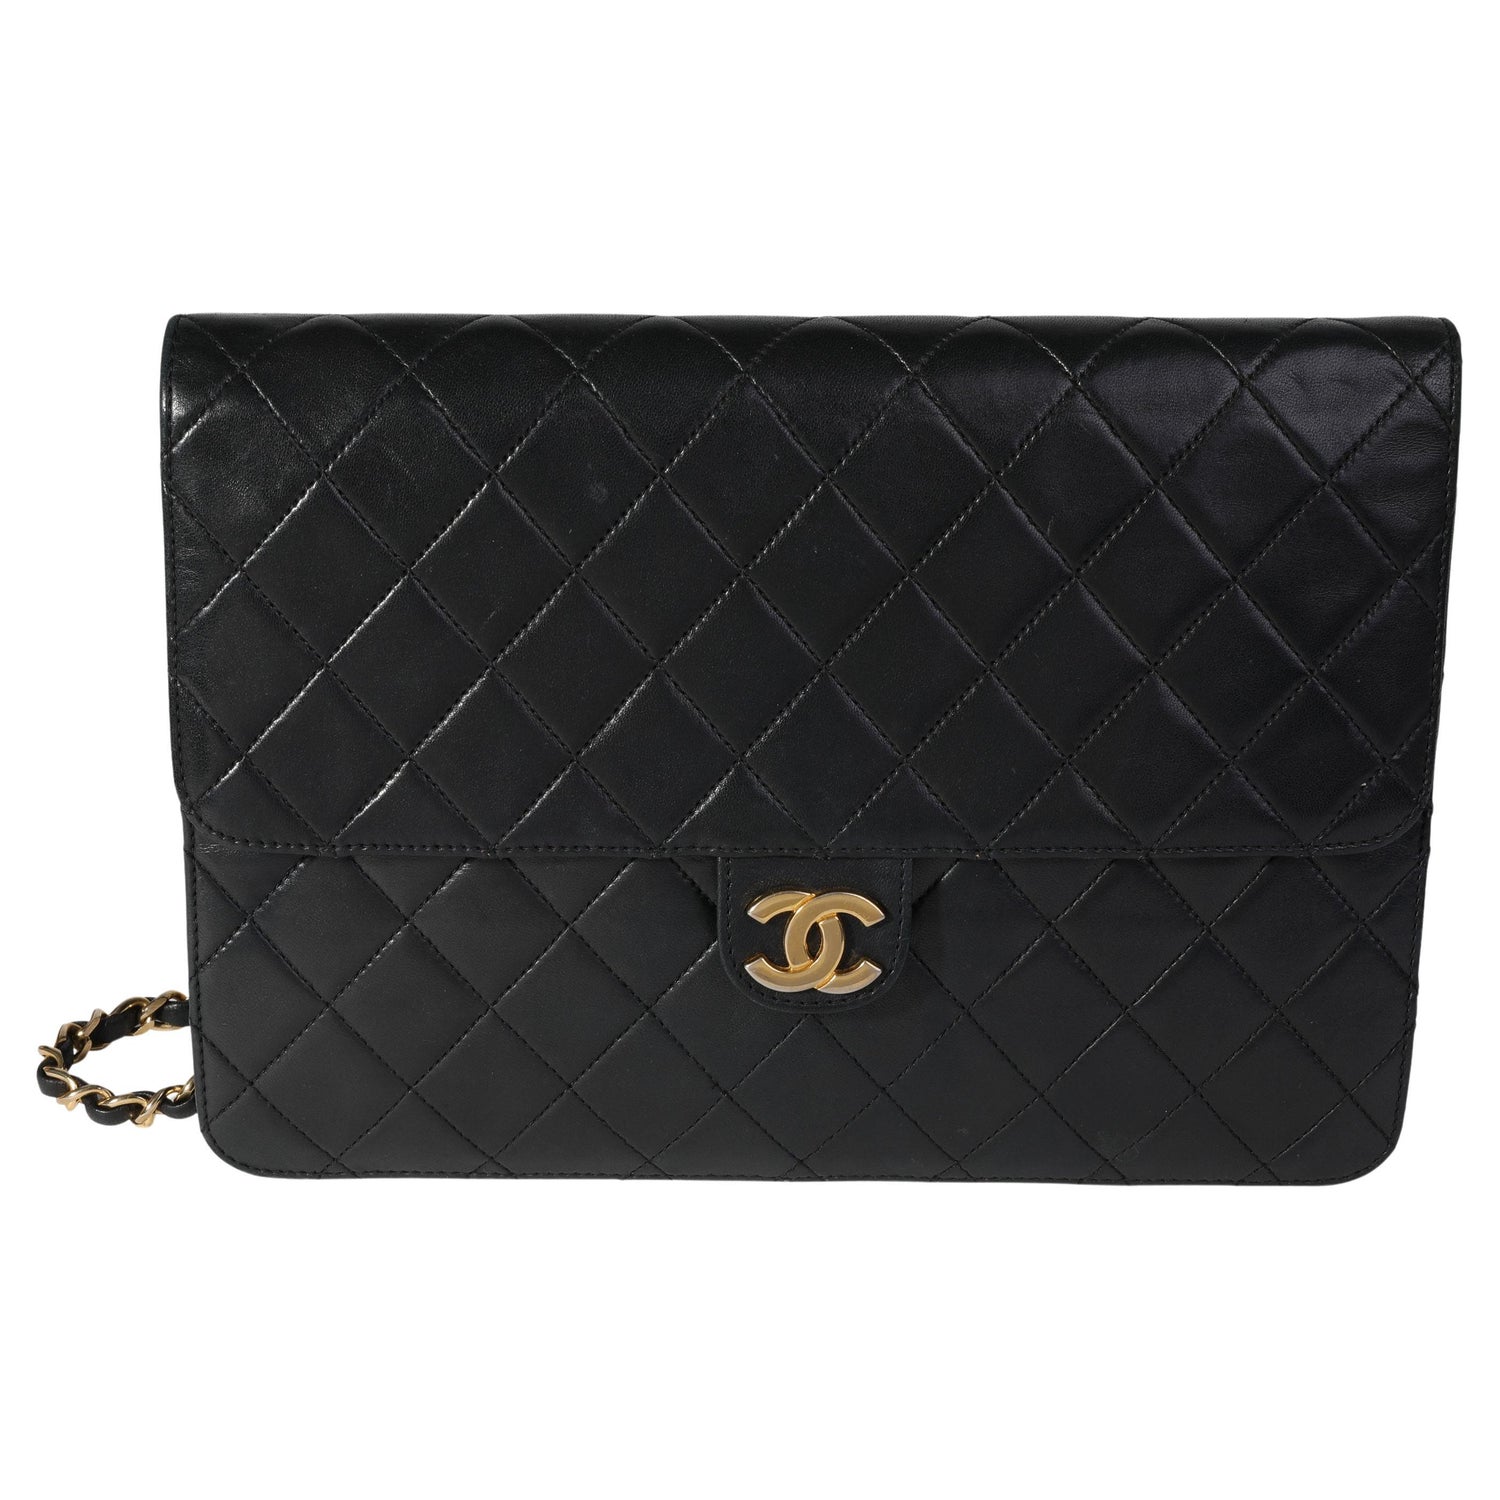 Chanel Navy Sparkle Tweed Classic Mini Rectangular Flap Bag For